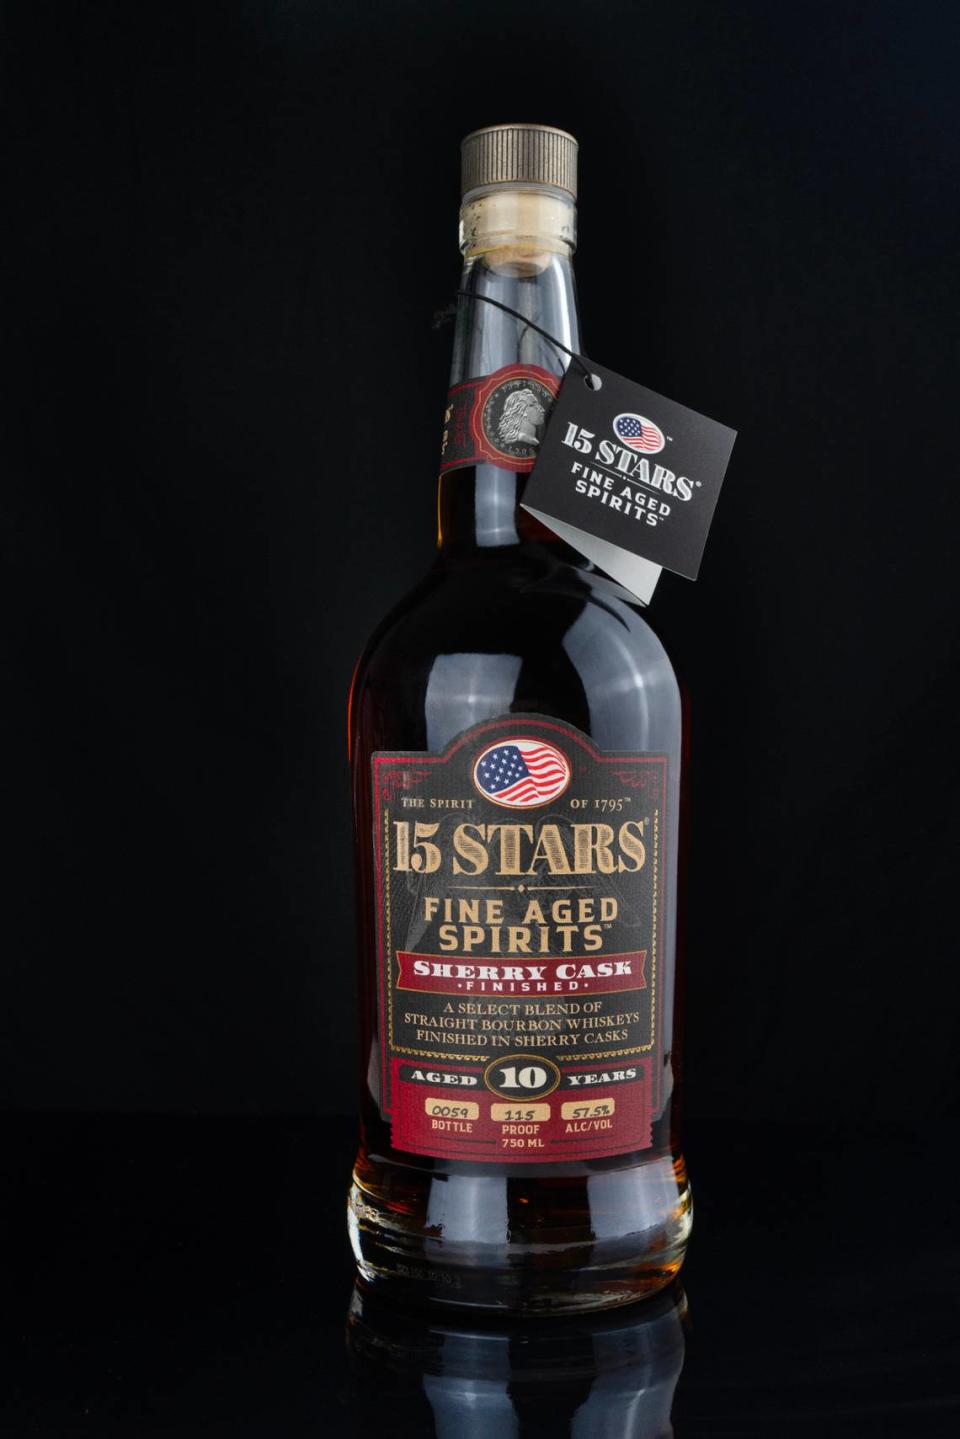 15STARS Sherry Cask Finish Bourbon is one of two new releases from the father and son team behind this award-winning label.